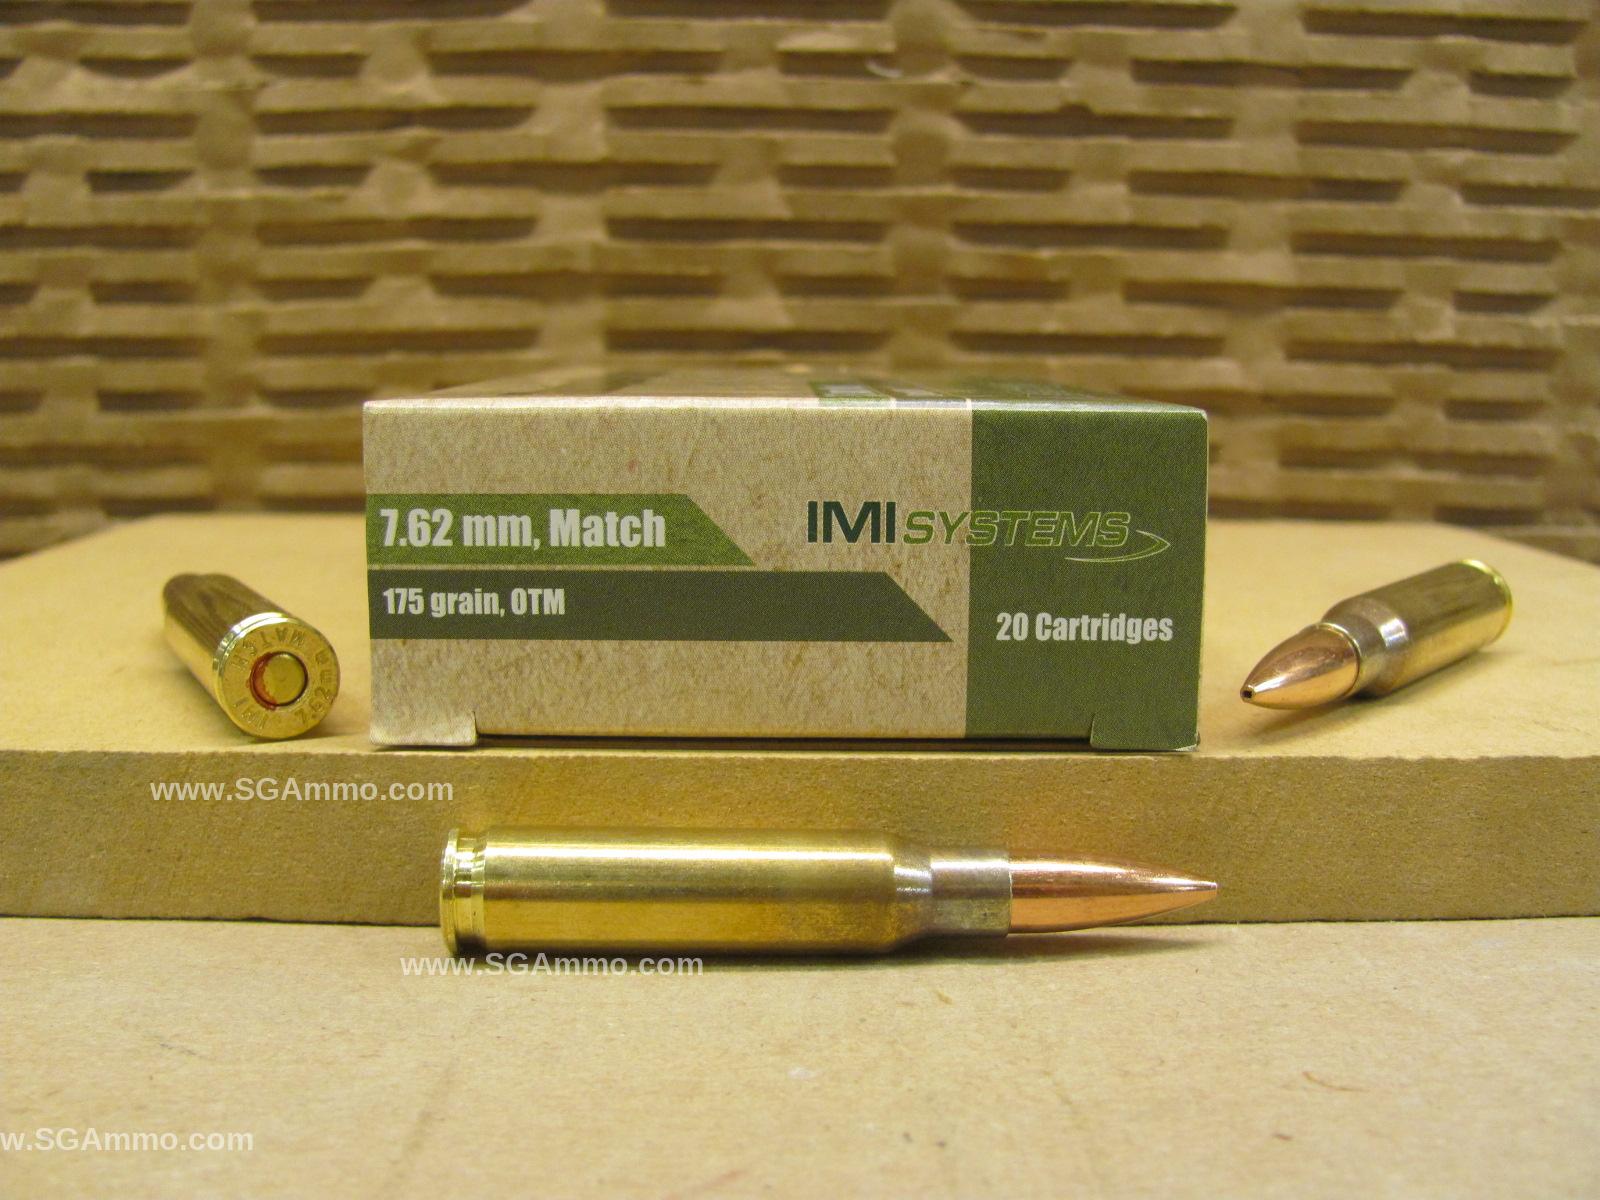 160 Round Can - 7.62x51 NATO 175 Grain BTHP SMK OTM Razor Core Match Ammo by IMI - Packed in M19A1 Canister